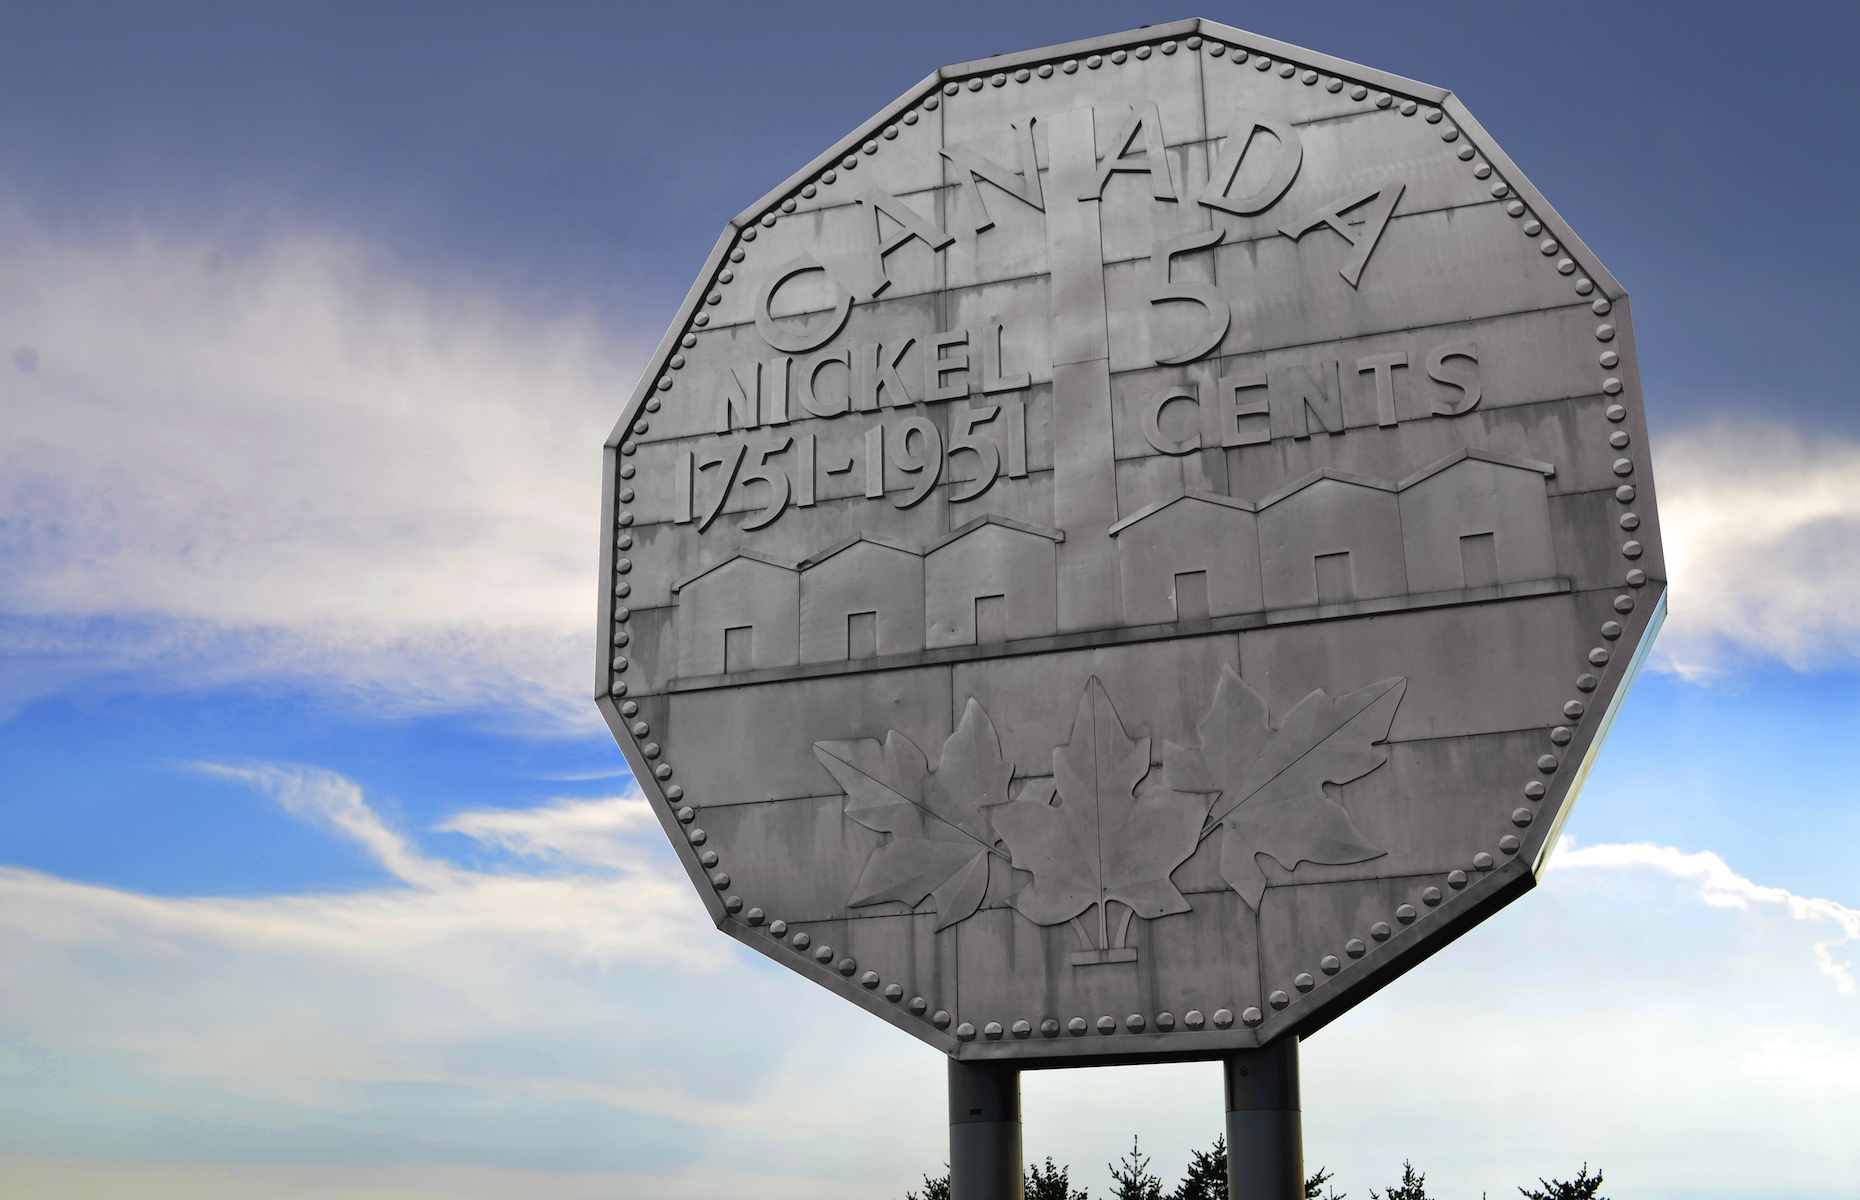 <p><a href="https://www.sciencenorth.ca/Dynamic-Earth/">The Big Nickel</a>, a giant replica of the Canadian currency, stands at nine metres (30 feet) tall and is located at the grounds of the Dynamic Earth science museum in Sudbury, Ontario. Built in 1964, it is the <a href="https://www.atlasobscura.com/places/big-nickel">world’s largest coin</a> and is an exact replica of the 1951 Canadian nickel.</p>